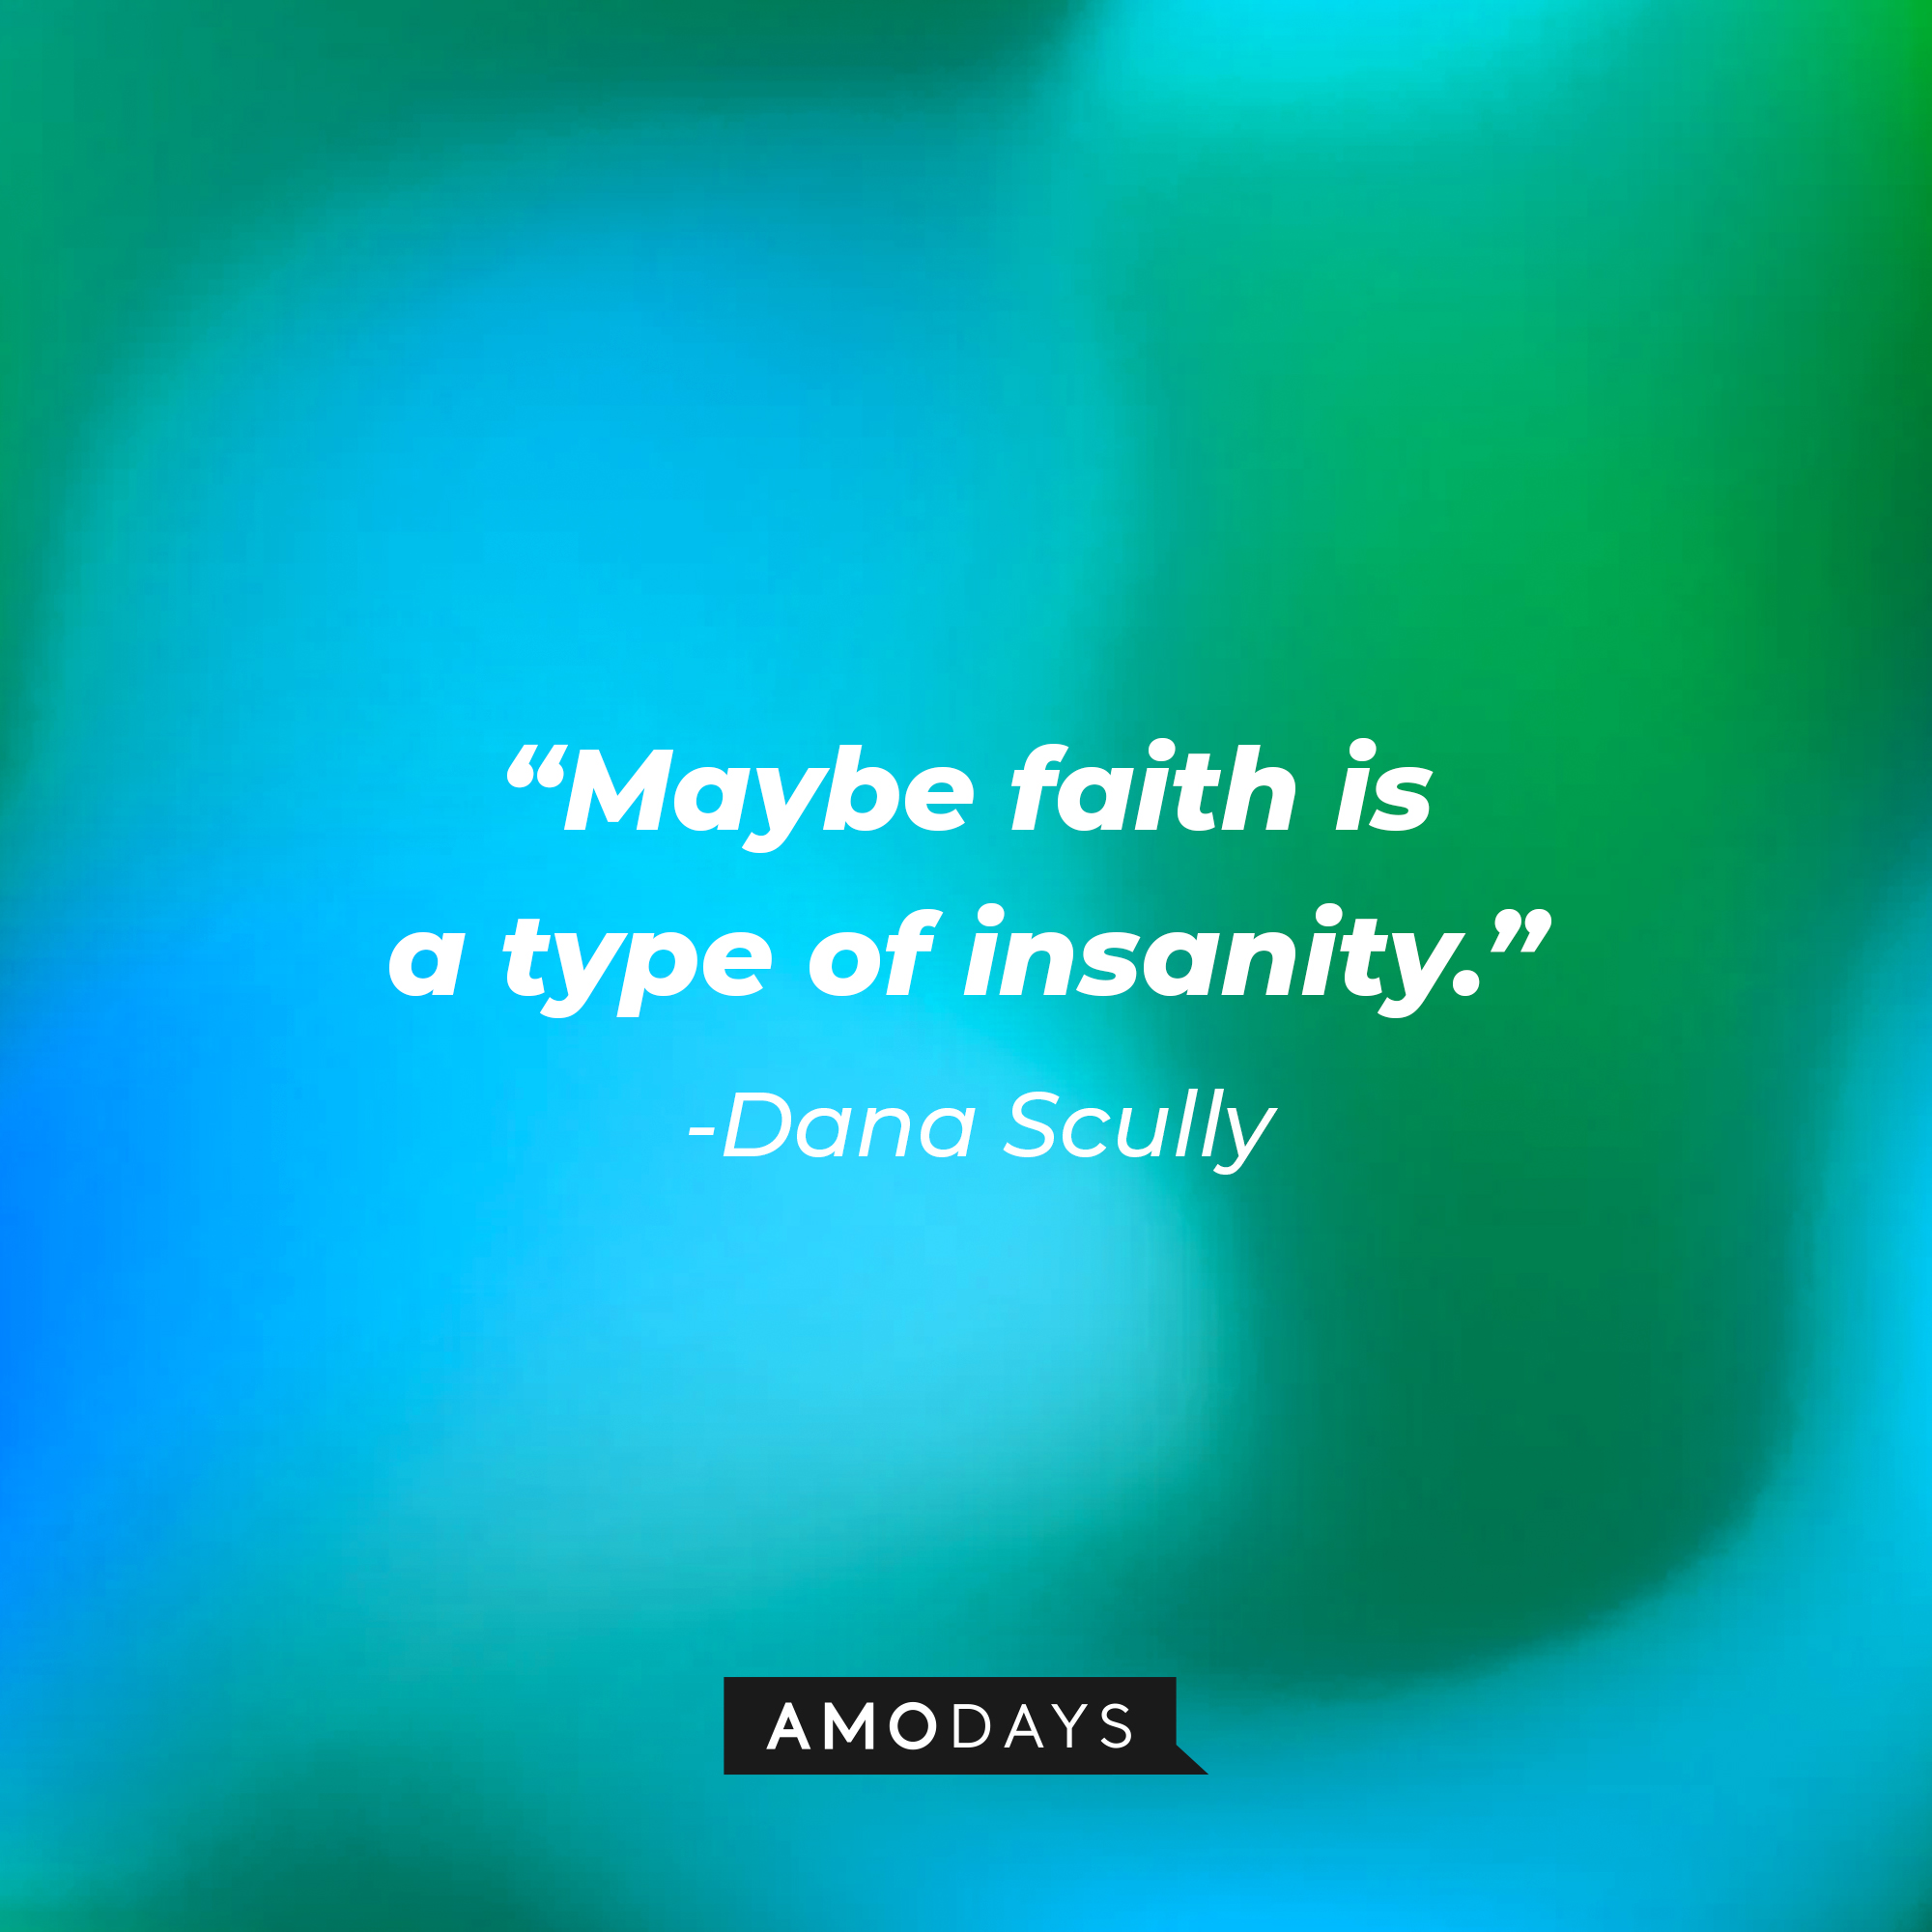 Dana Scully's quote: "Maybe faith is a type of insanity." | Source: AmoDays